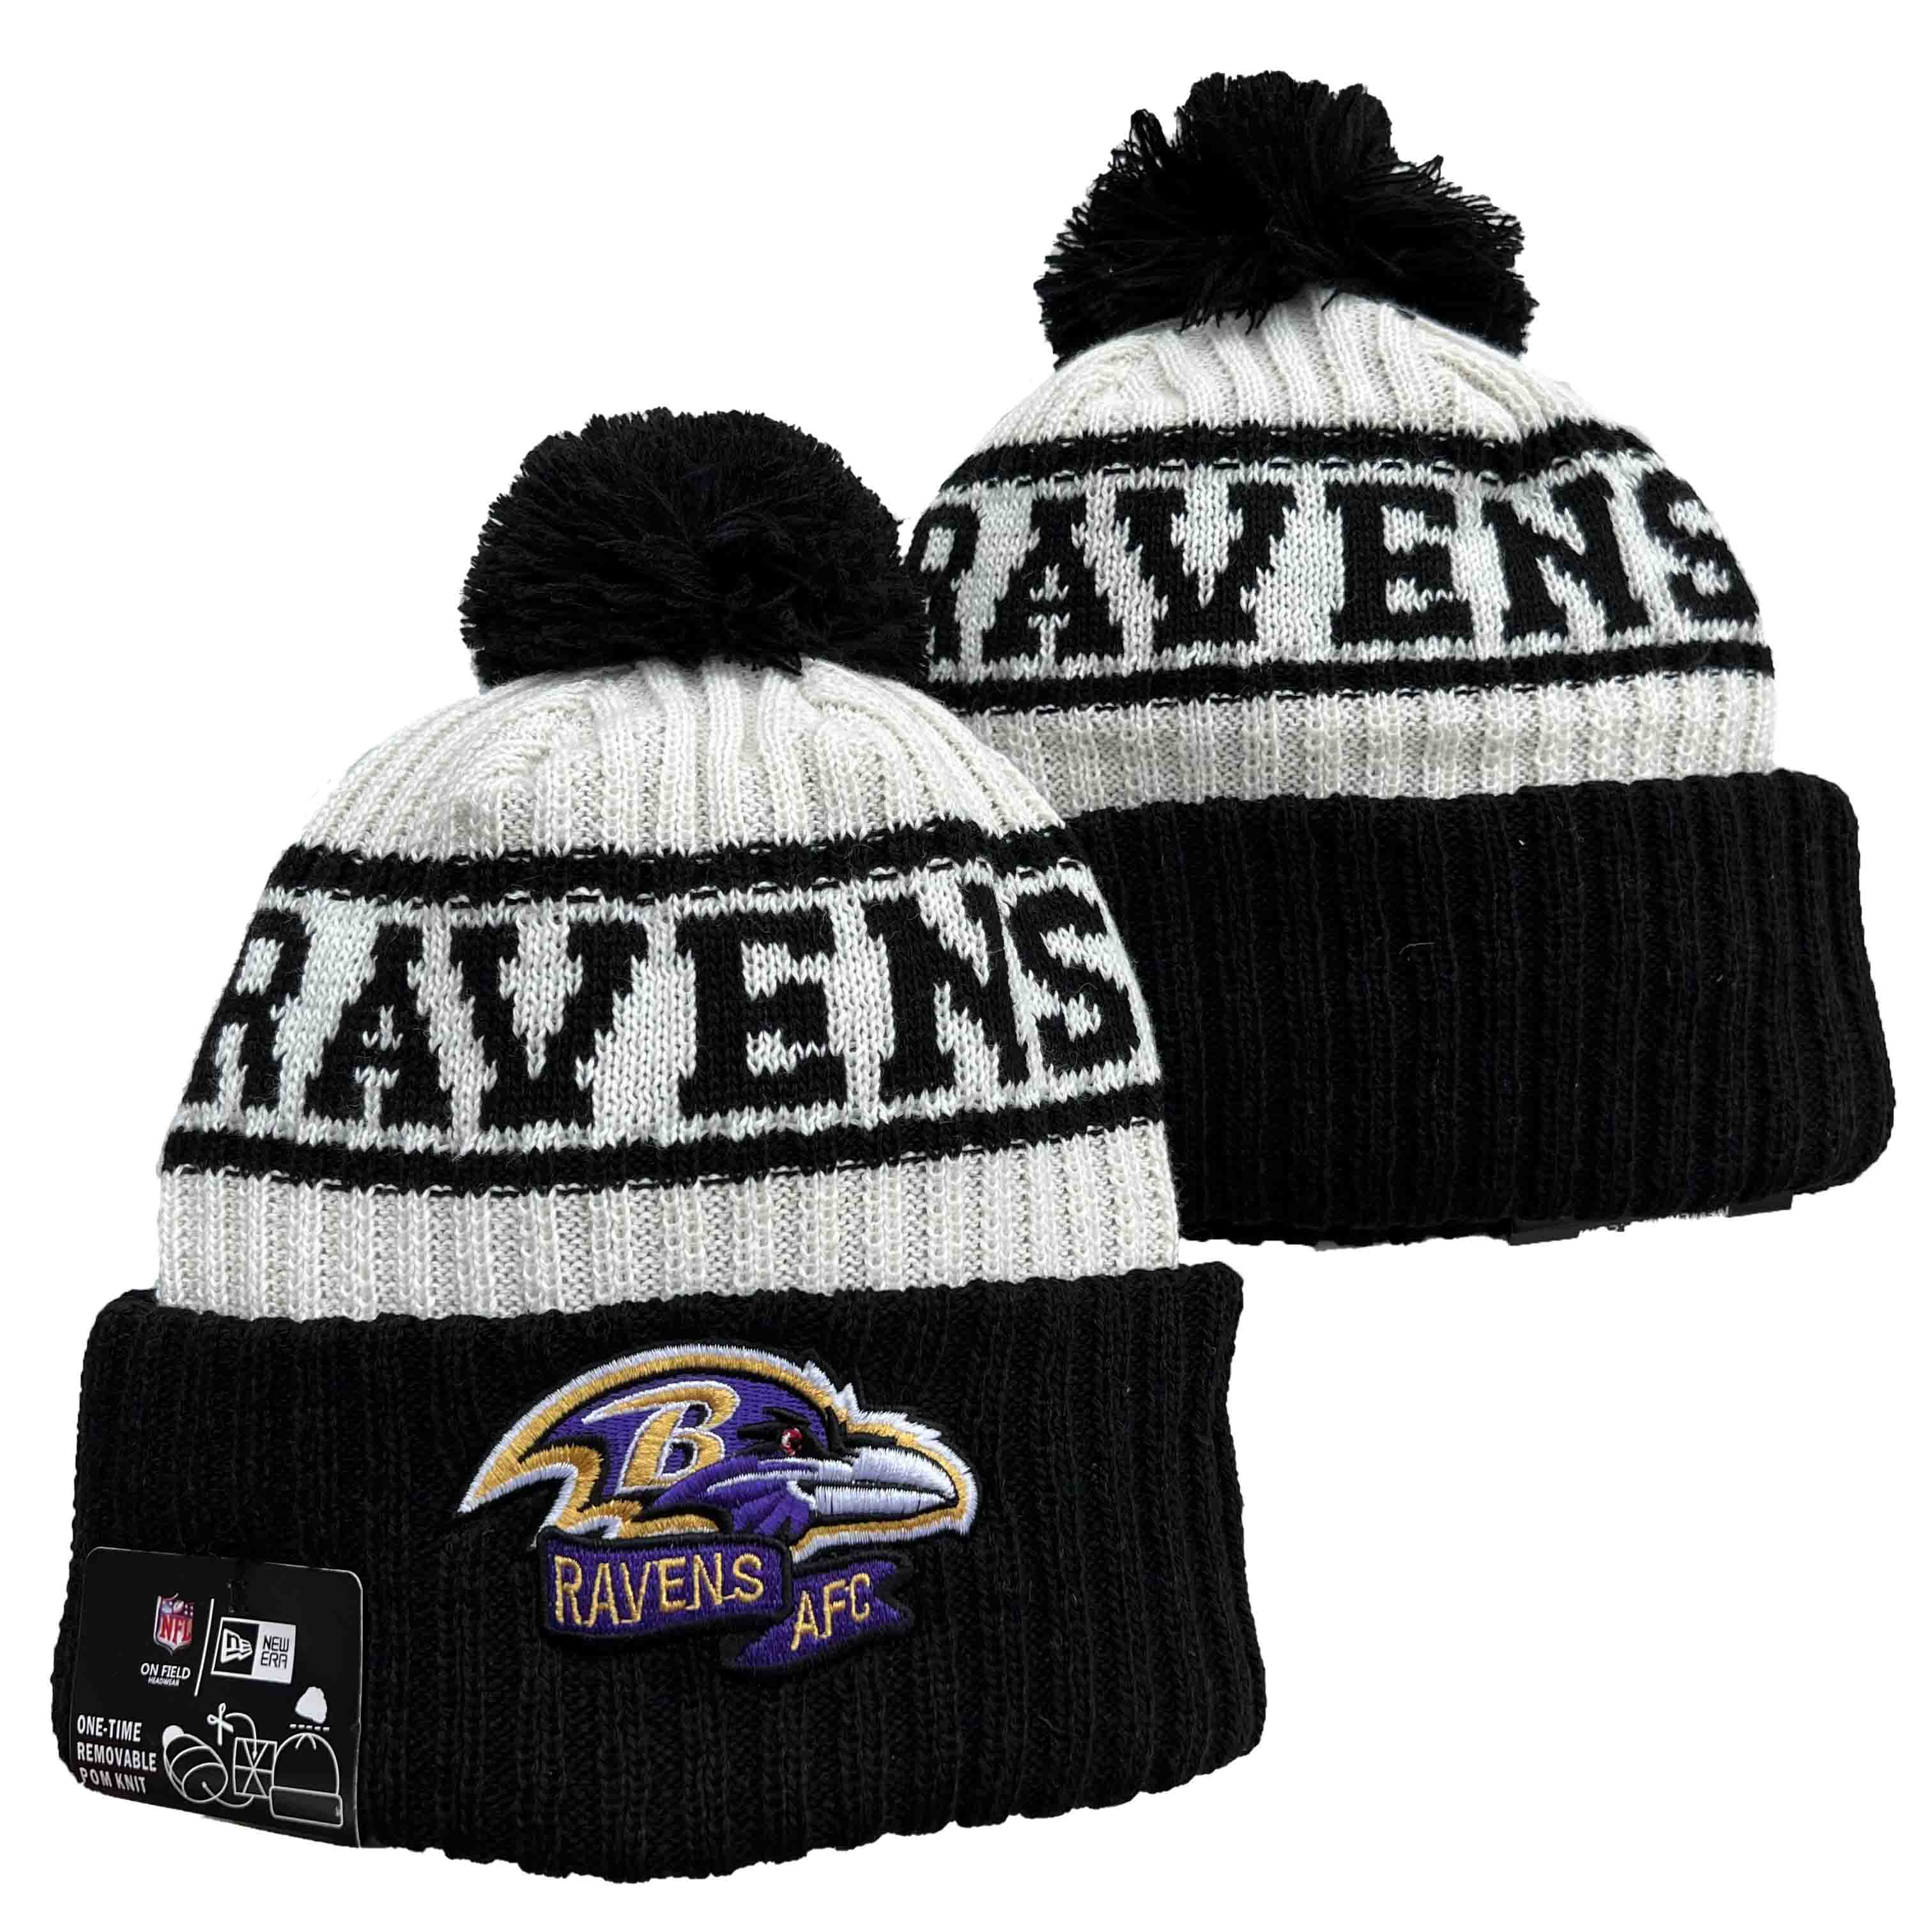 NFL Baltimore Ravens Beanies Knit Hats-YD1192